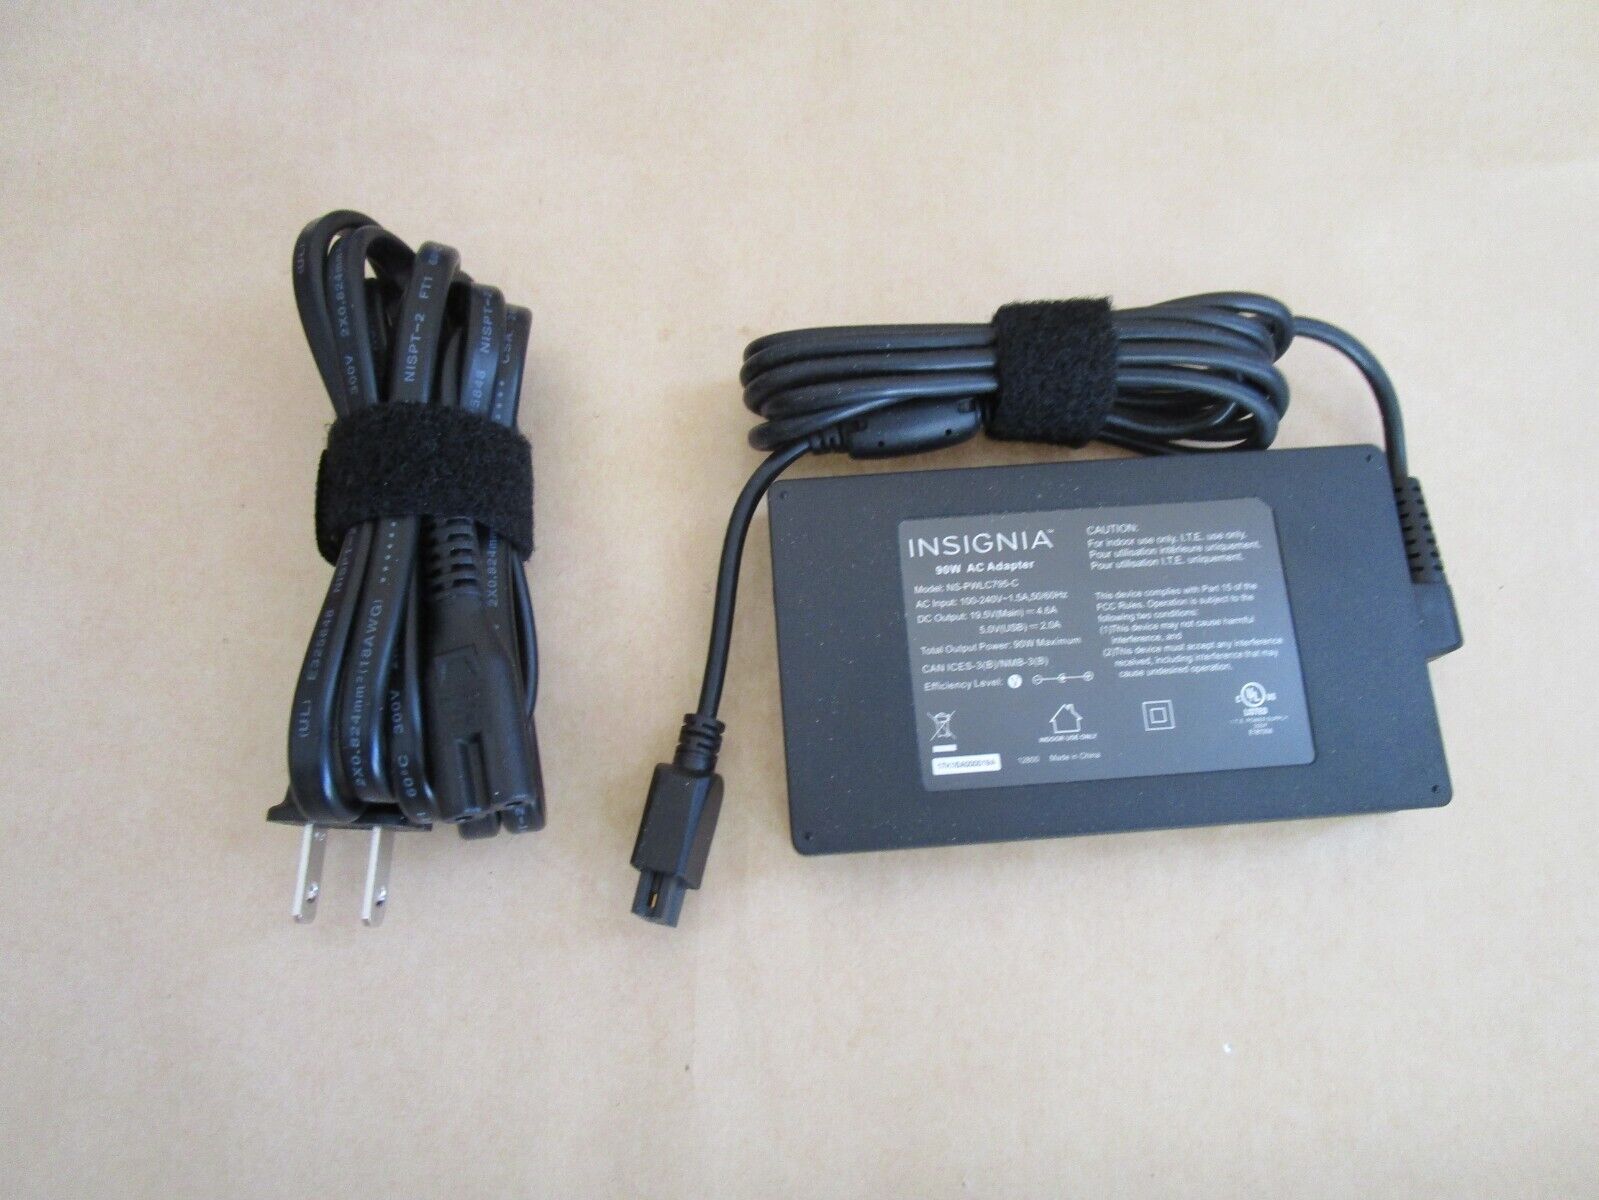 Insignia Universal Laptop 90W Charger NS-PWLC795 - Power block only. No tips.